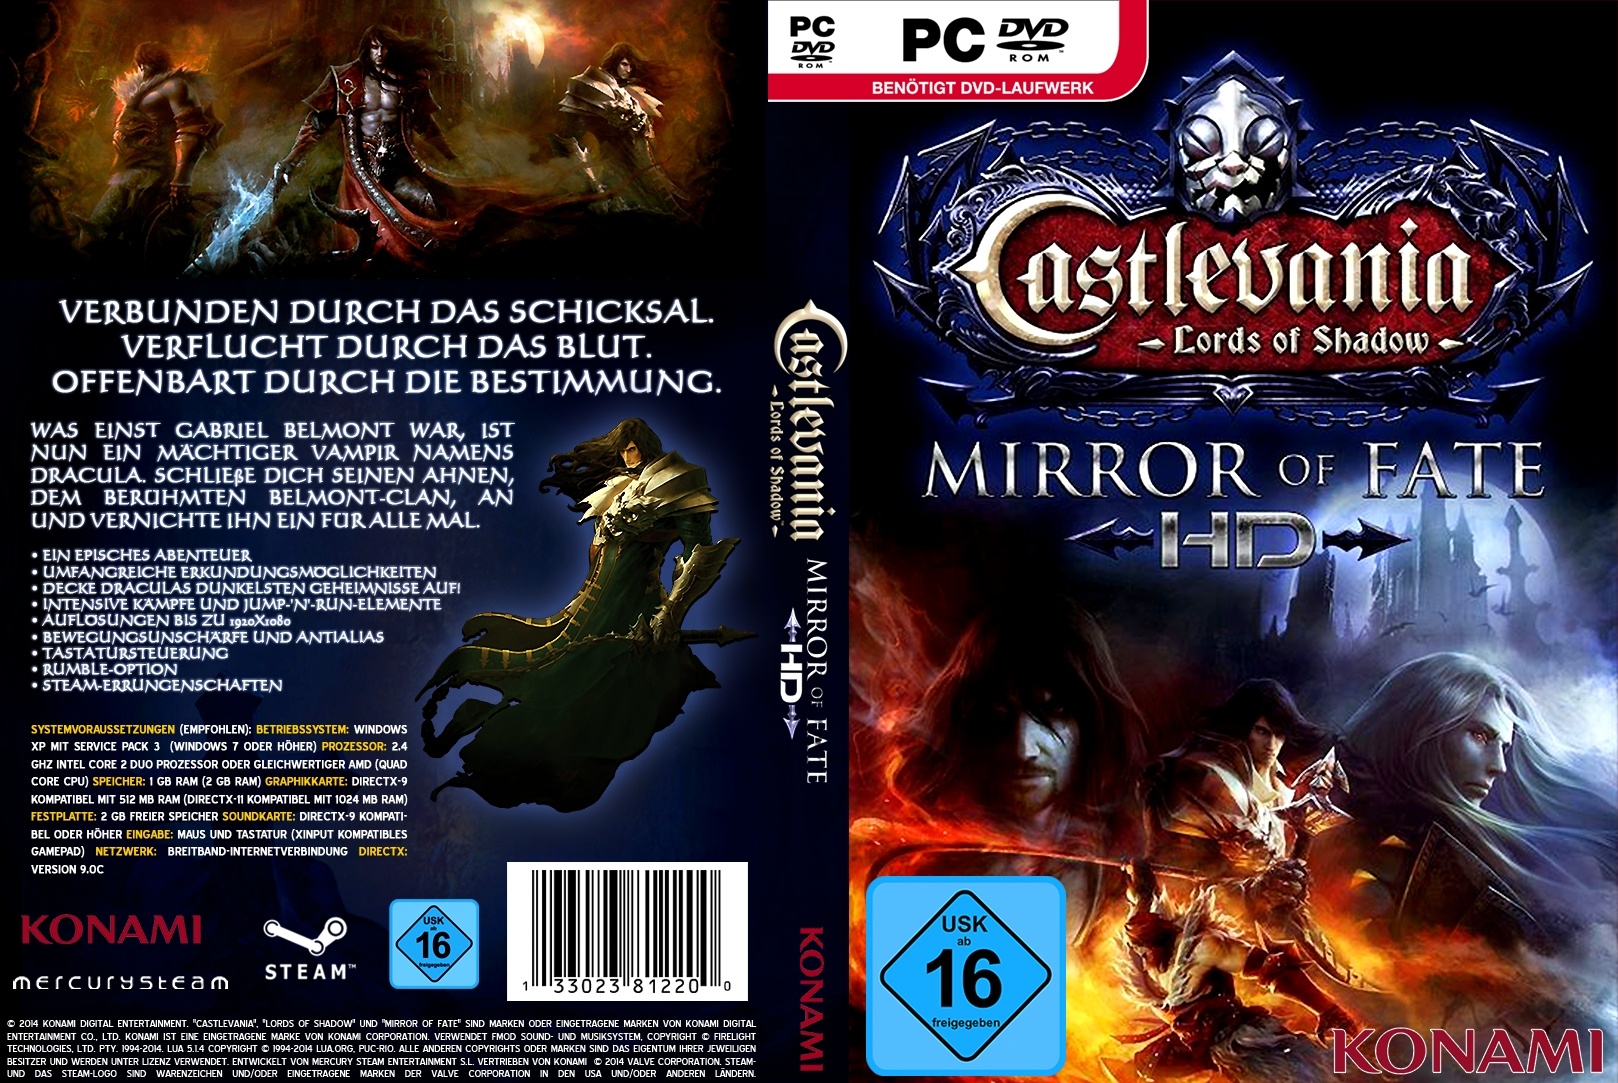 Castlevania: Lords of Shadow - Mirror of Fate (2013) - MobyGames